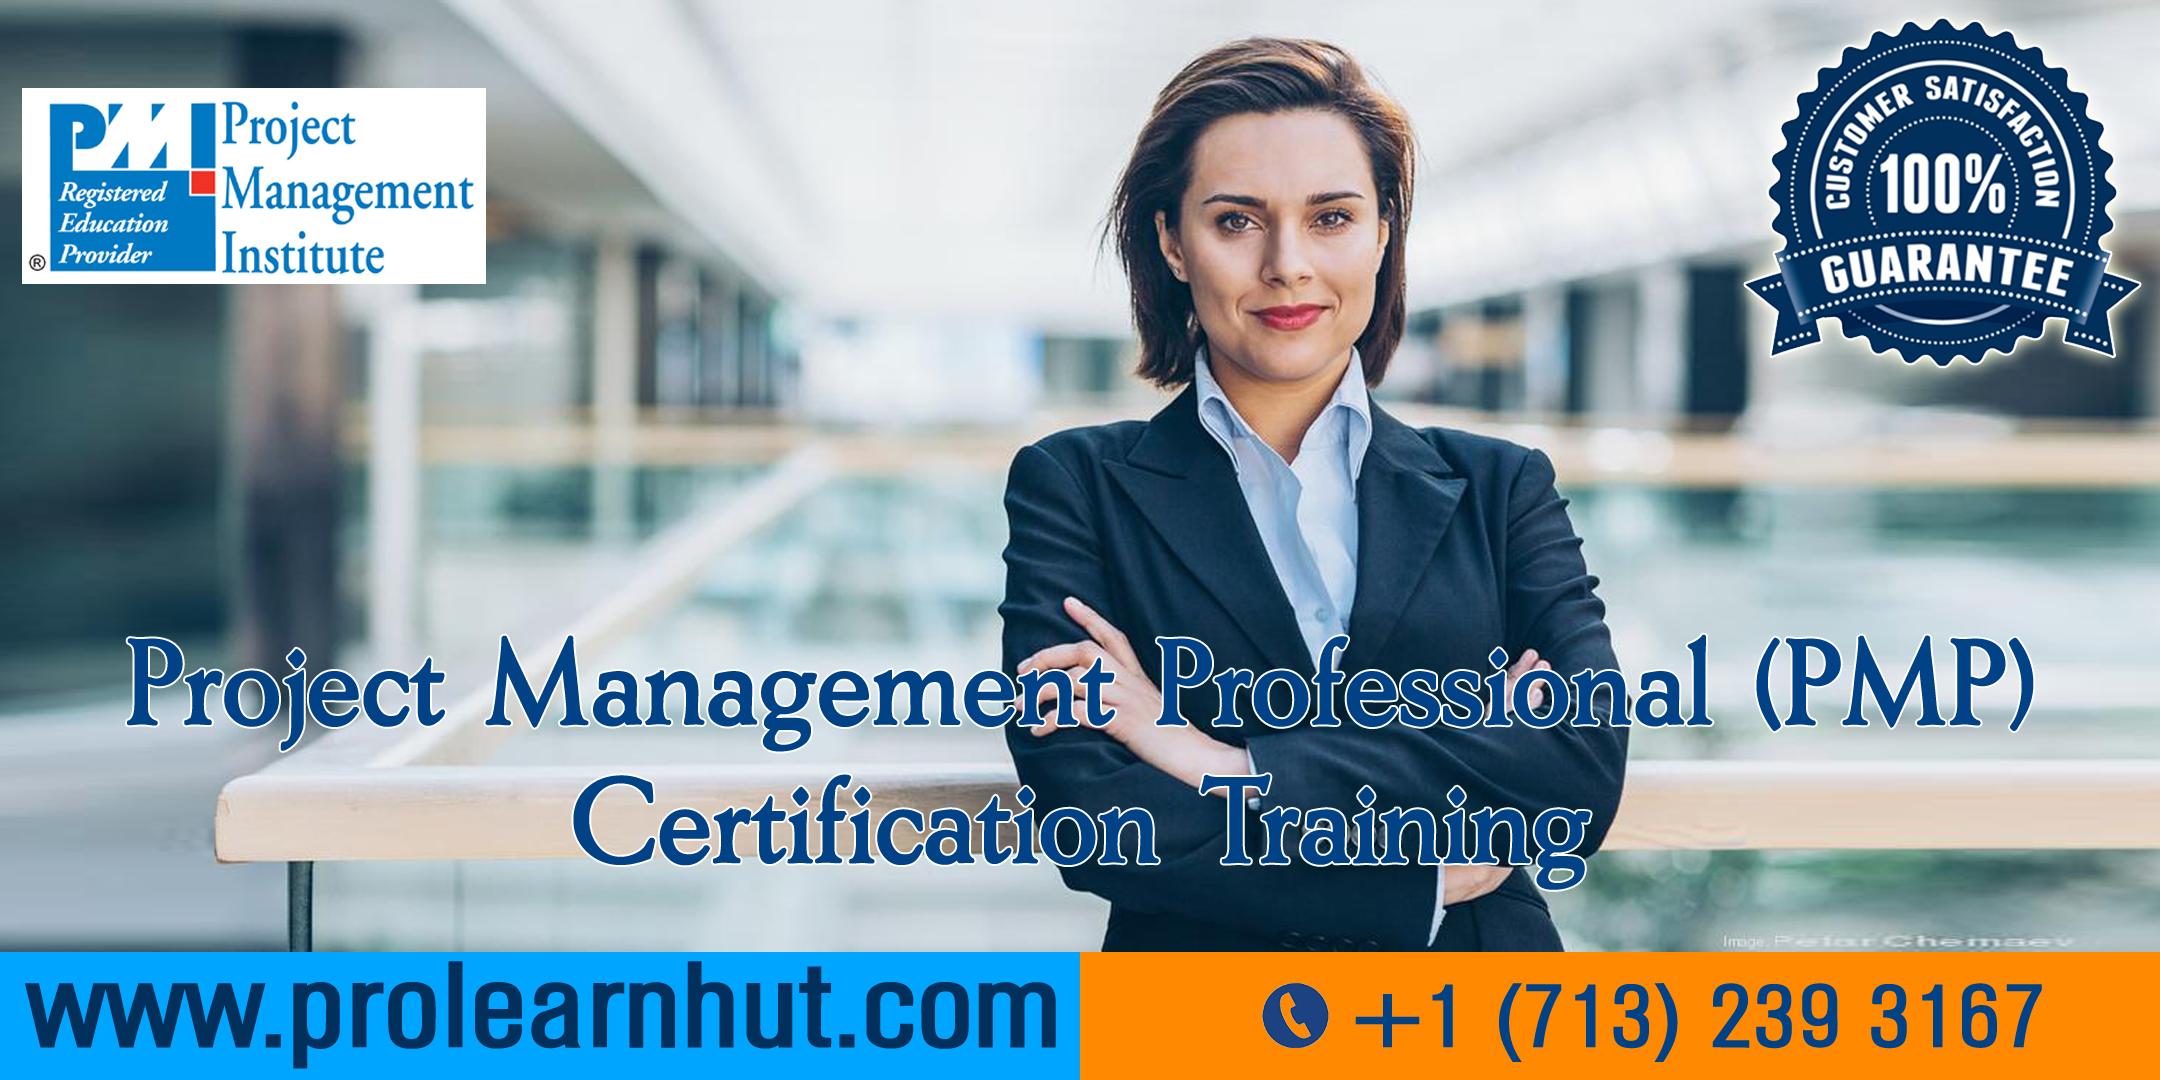 PMP Certification | Project Management Certification| PMP Training in Irving, TX | ProLearnHut